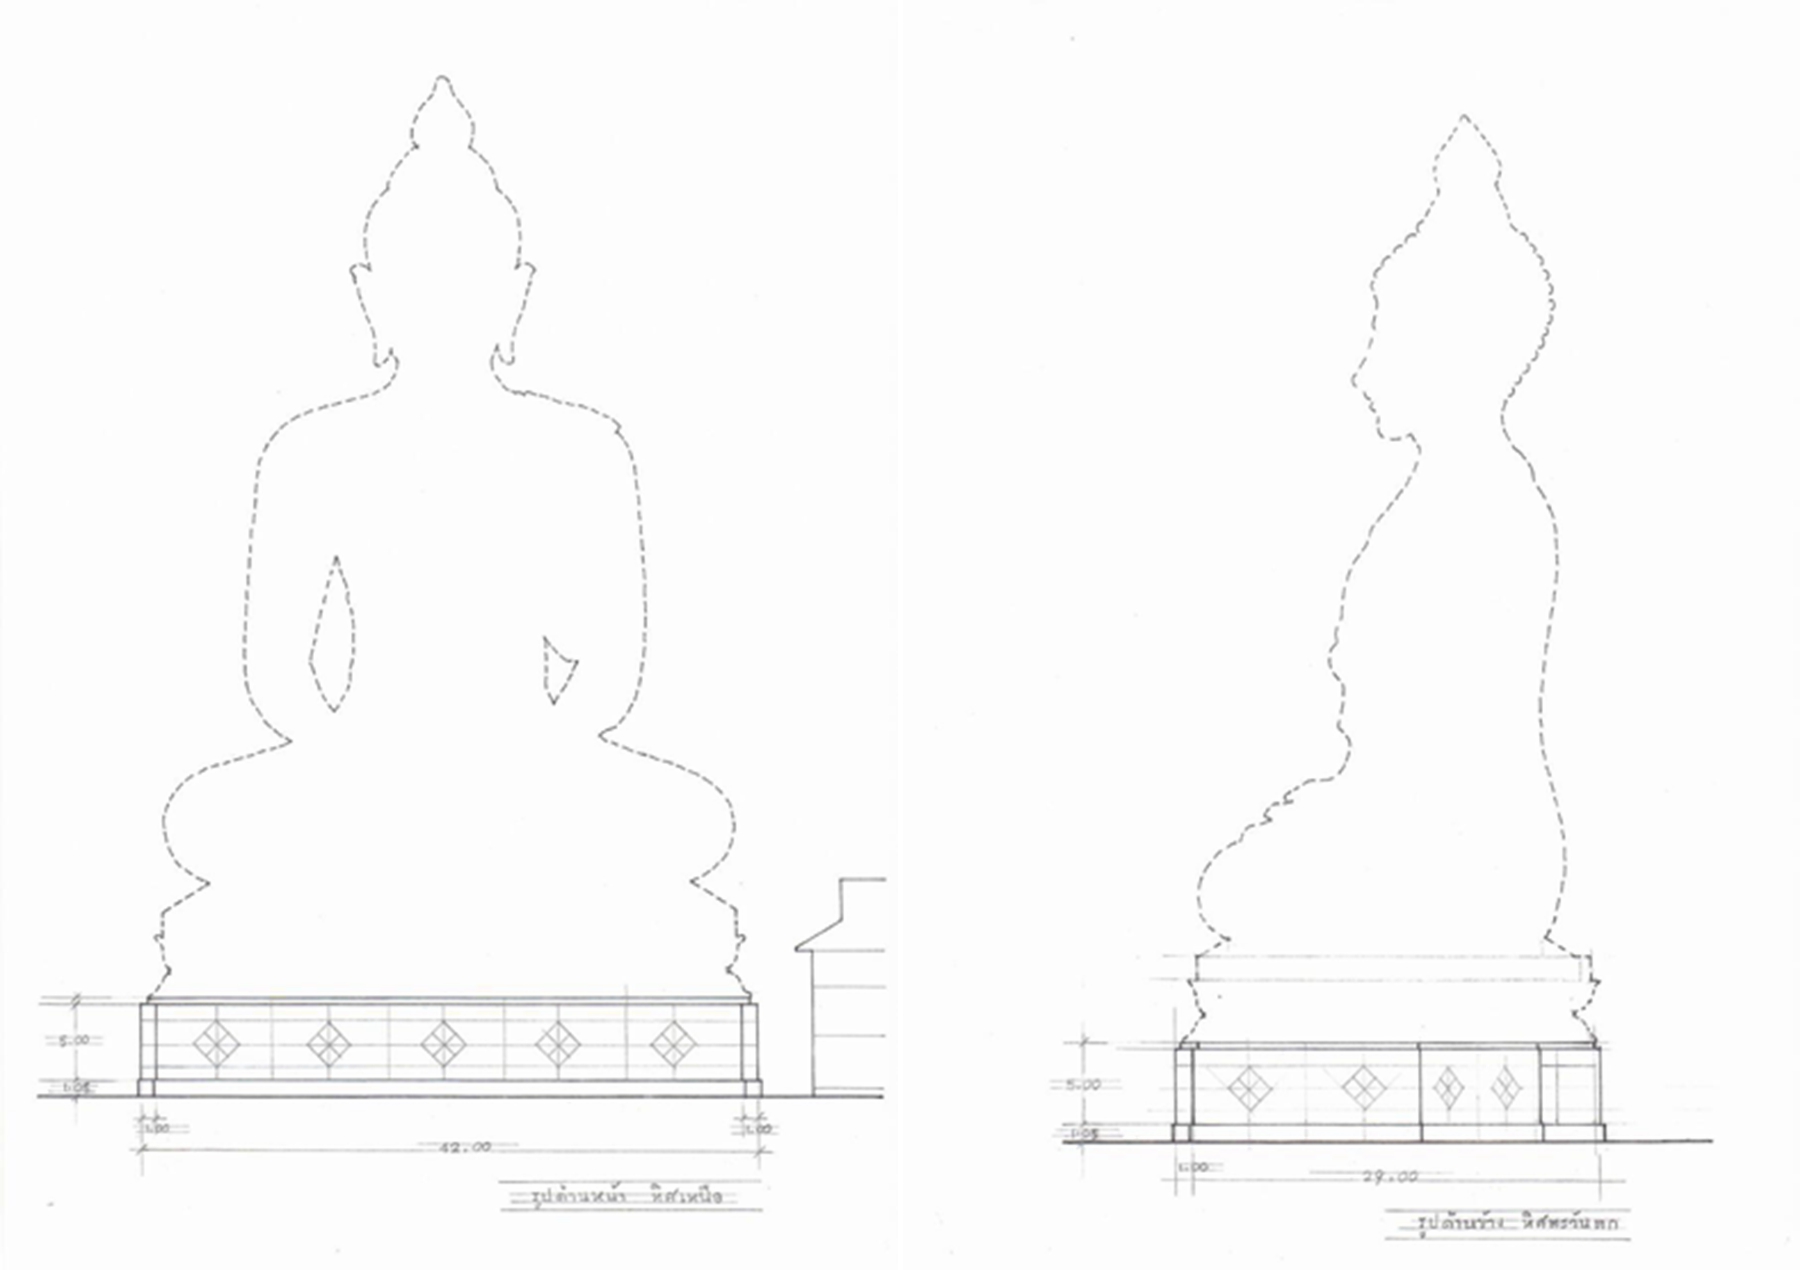 Buddha Images in client�s mind  before Design and Fabrication